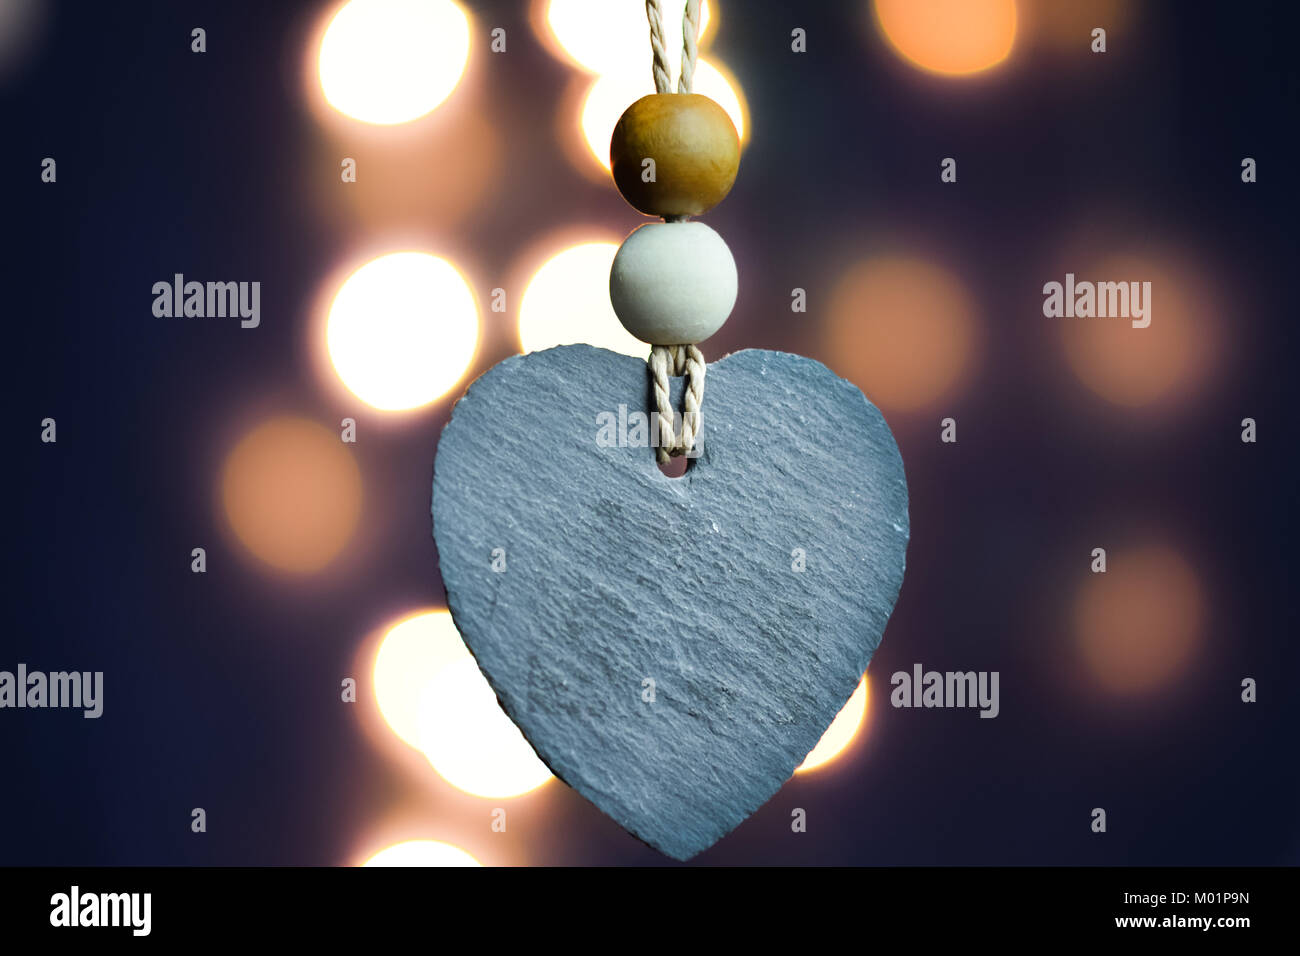 Stone heart with blurry light bokeh background Stock Photo